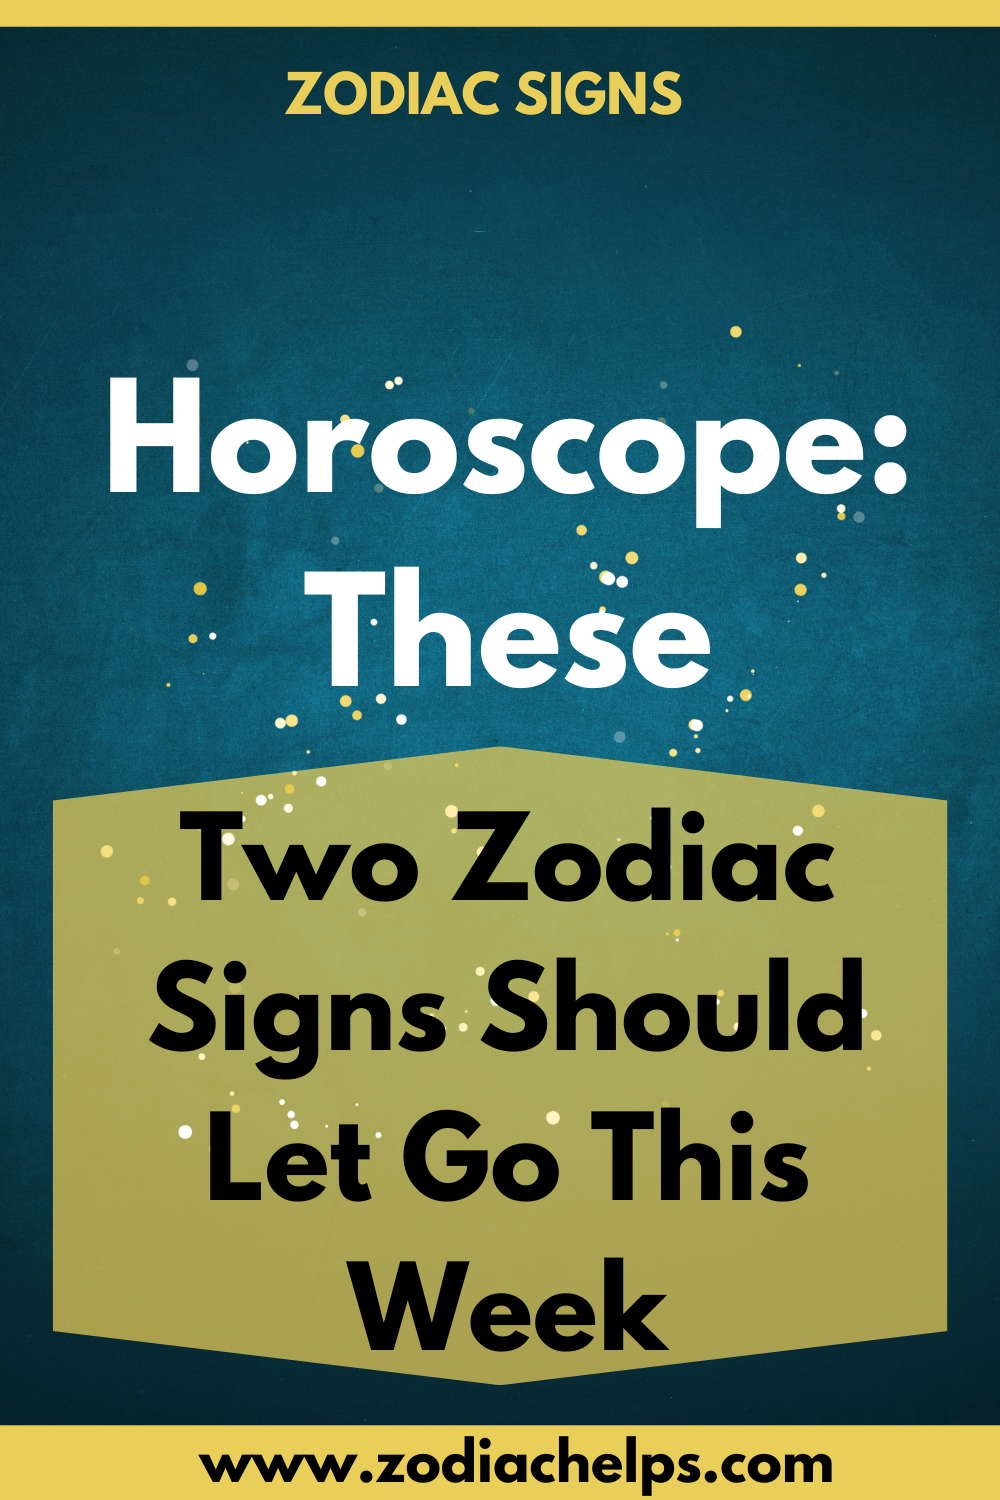 Horoscope: These Two Zodiac Signs Should Let Go This Week